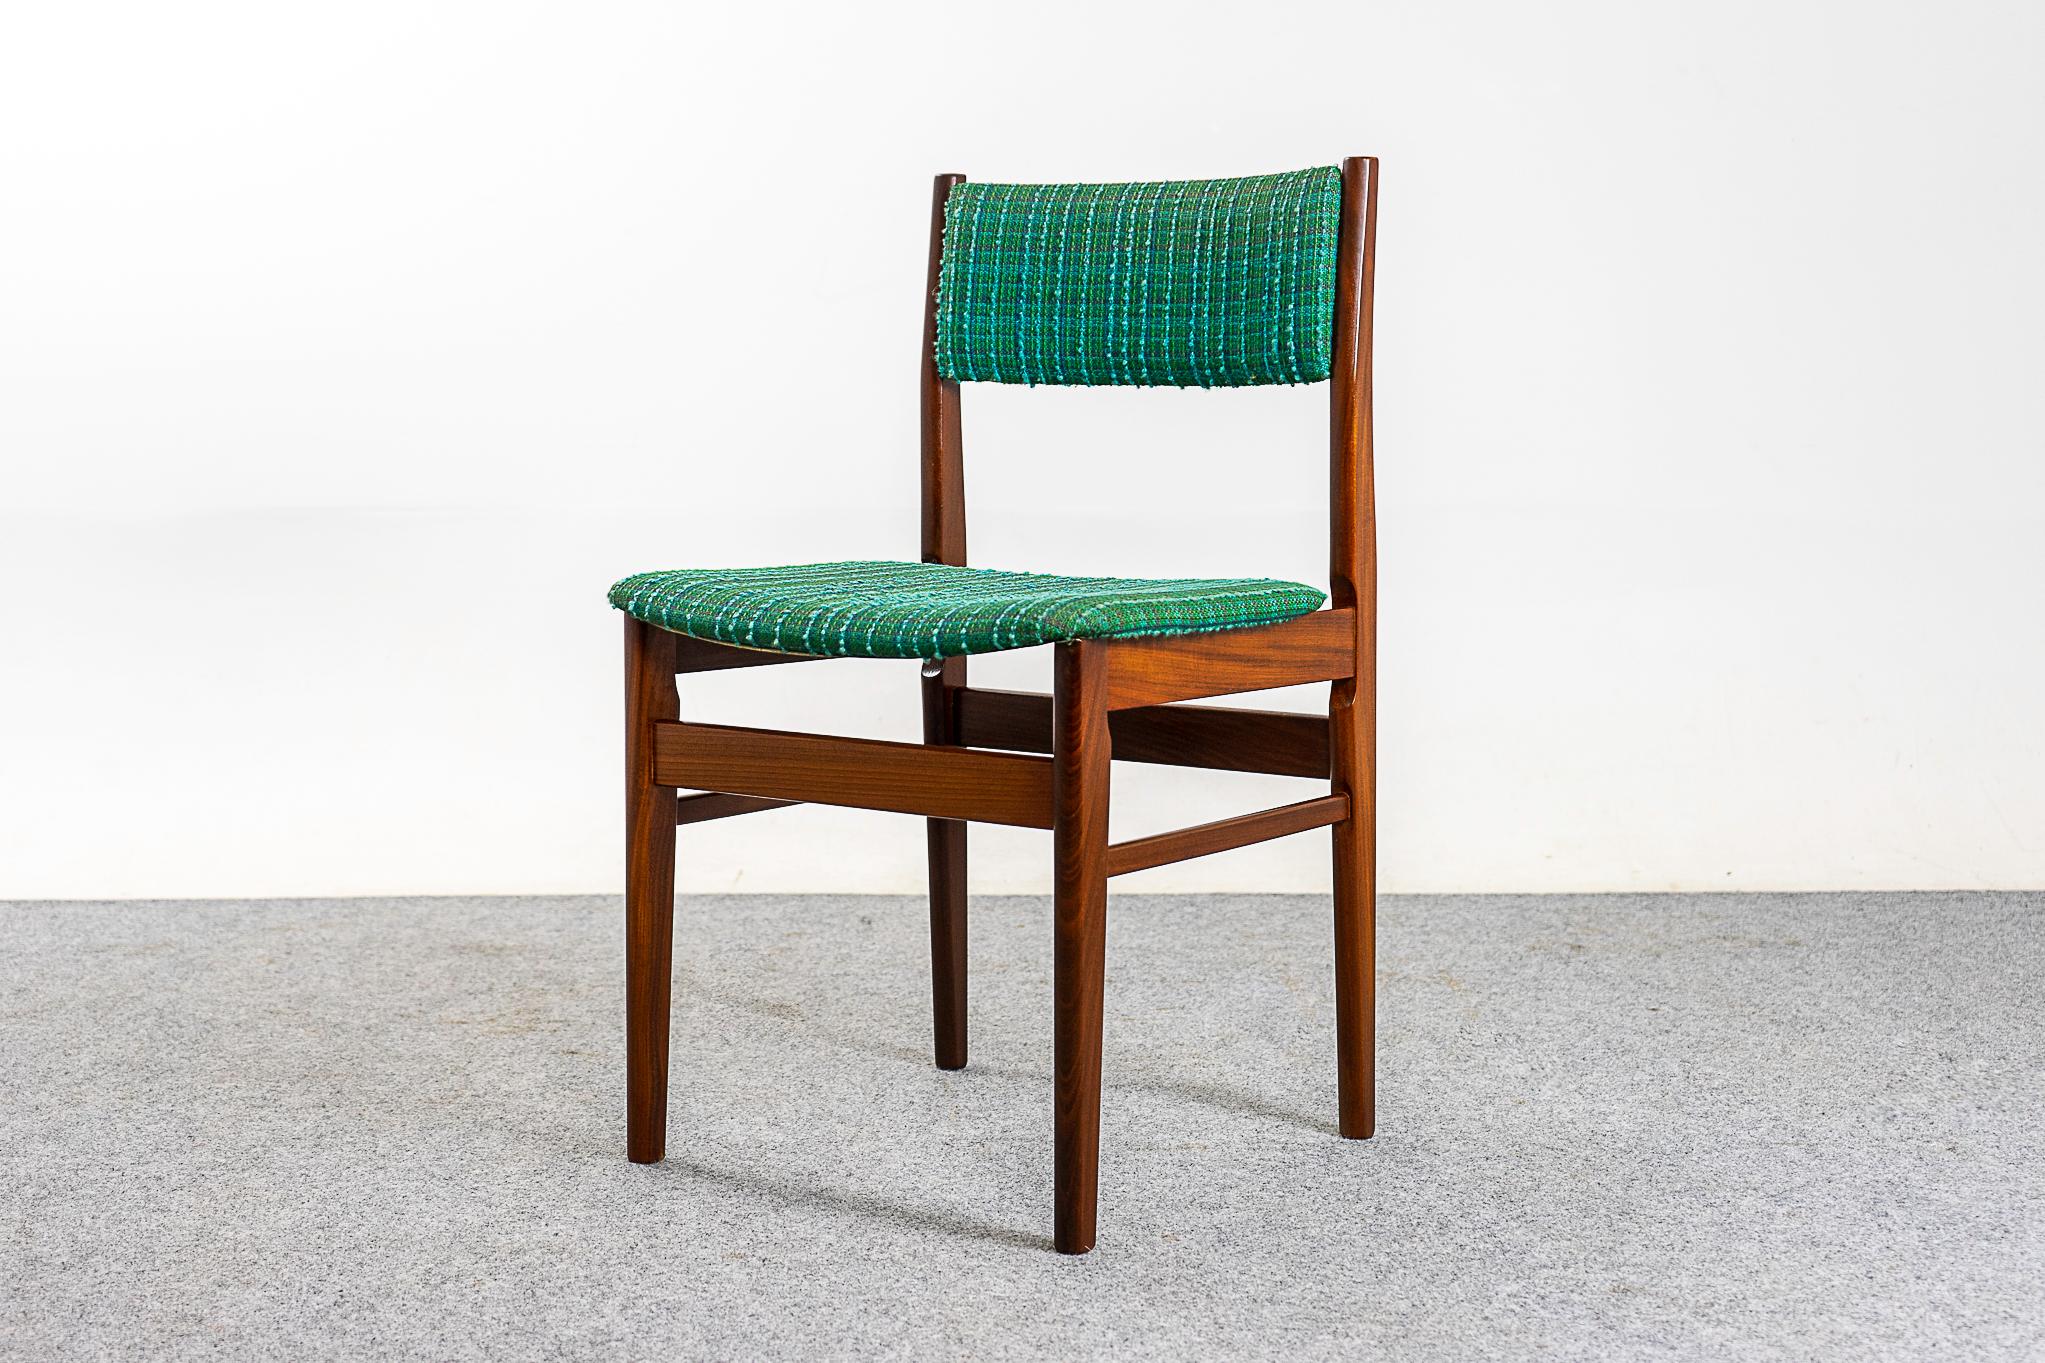 Teak dining chairs, circa 1960s. Beautifully curved backrests and generous seat design provide support and comfort. Solid wood legs feature cross braces for added stability and support. Host the dinner party you've always wanted to!

Unrestored